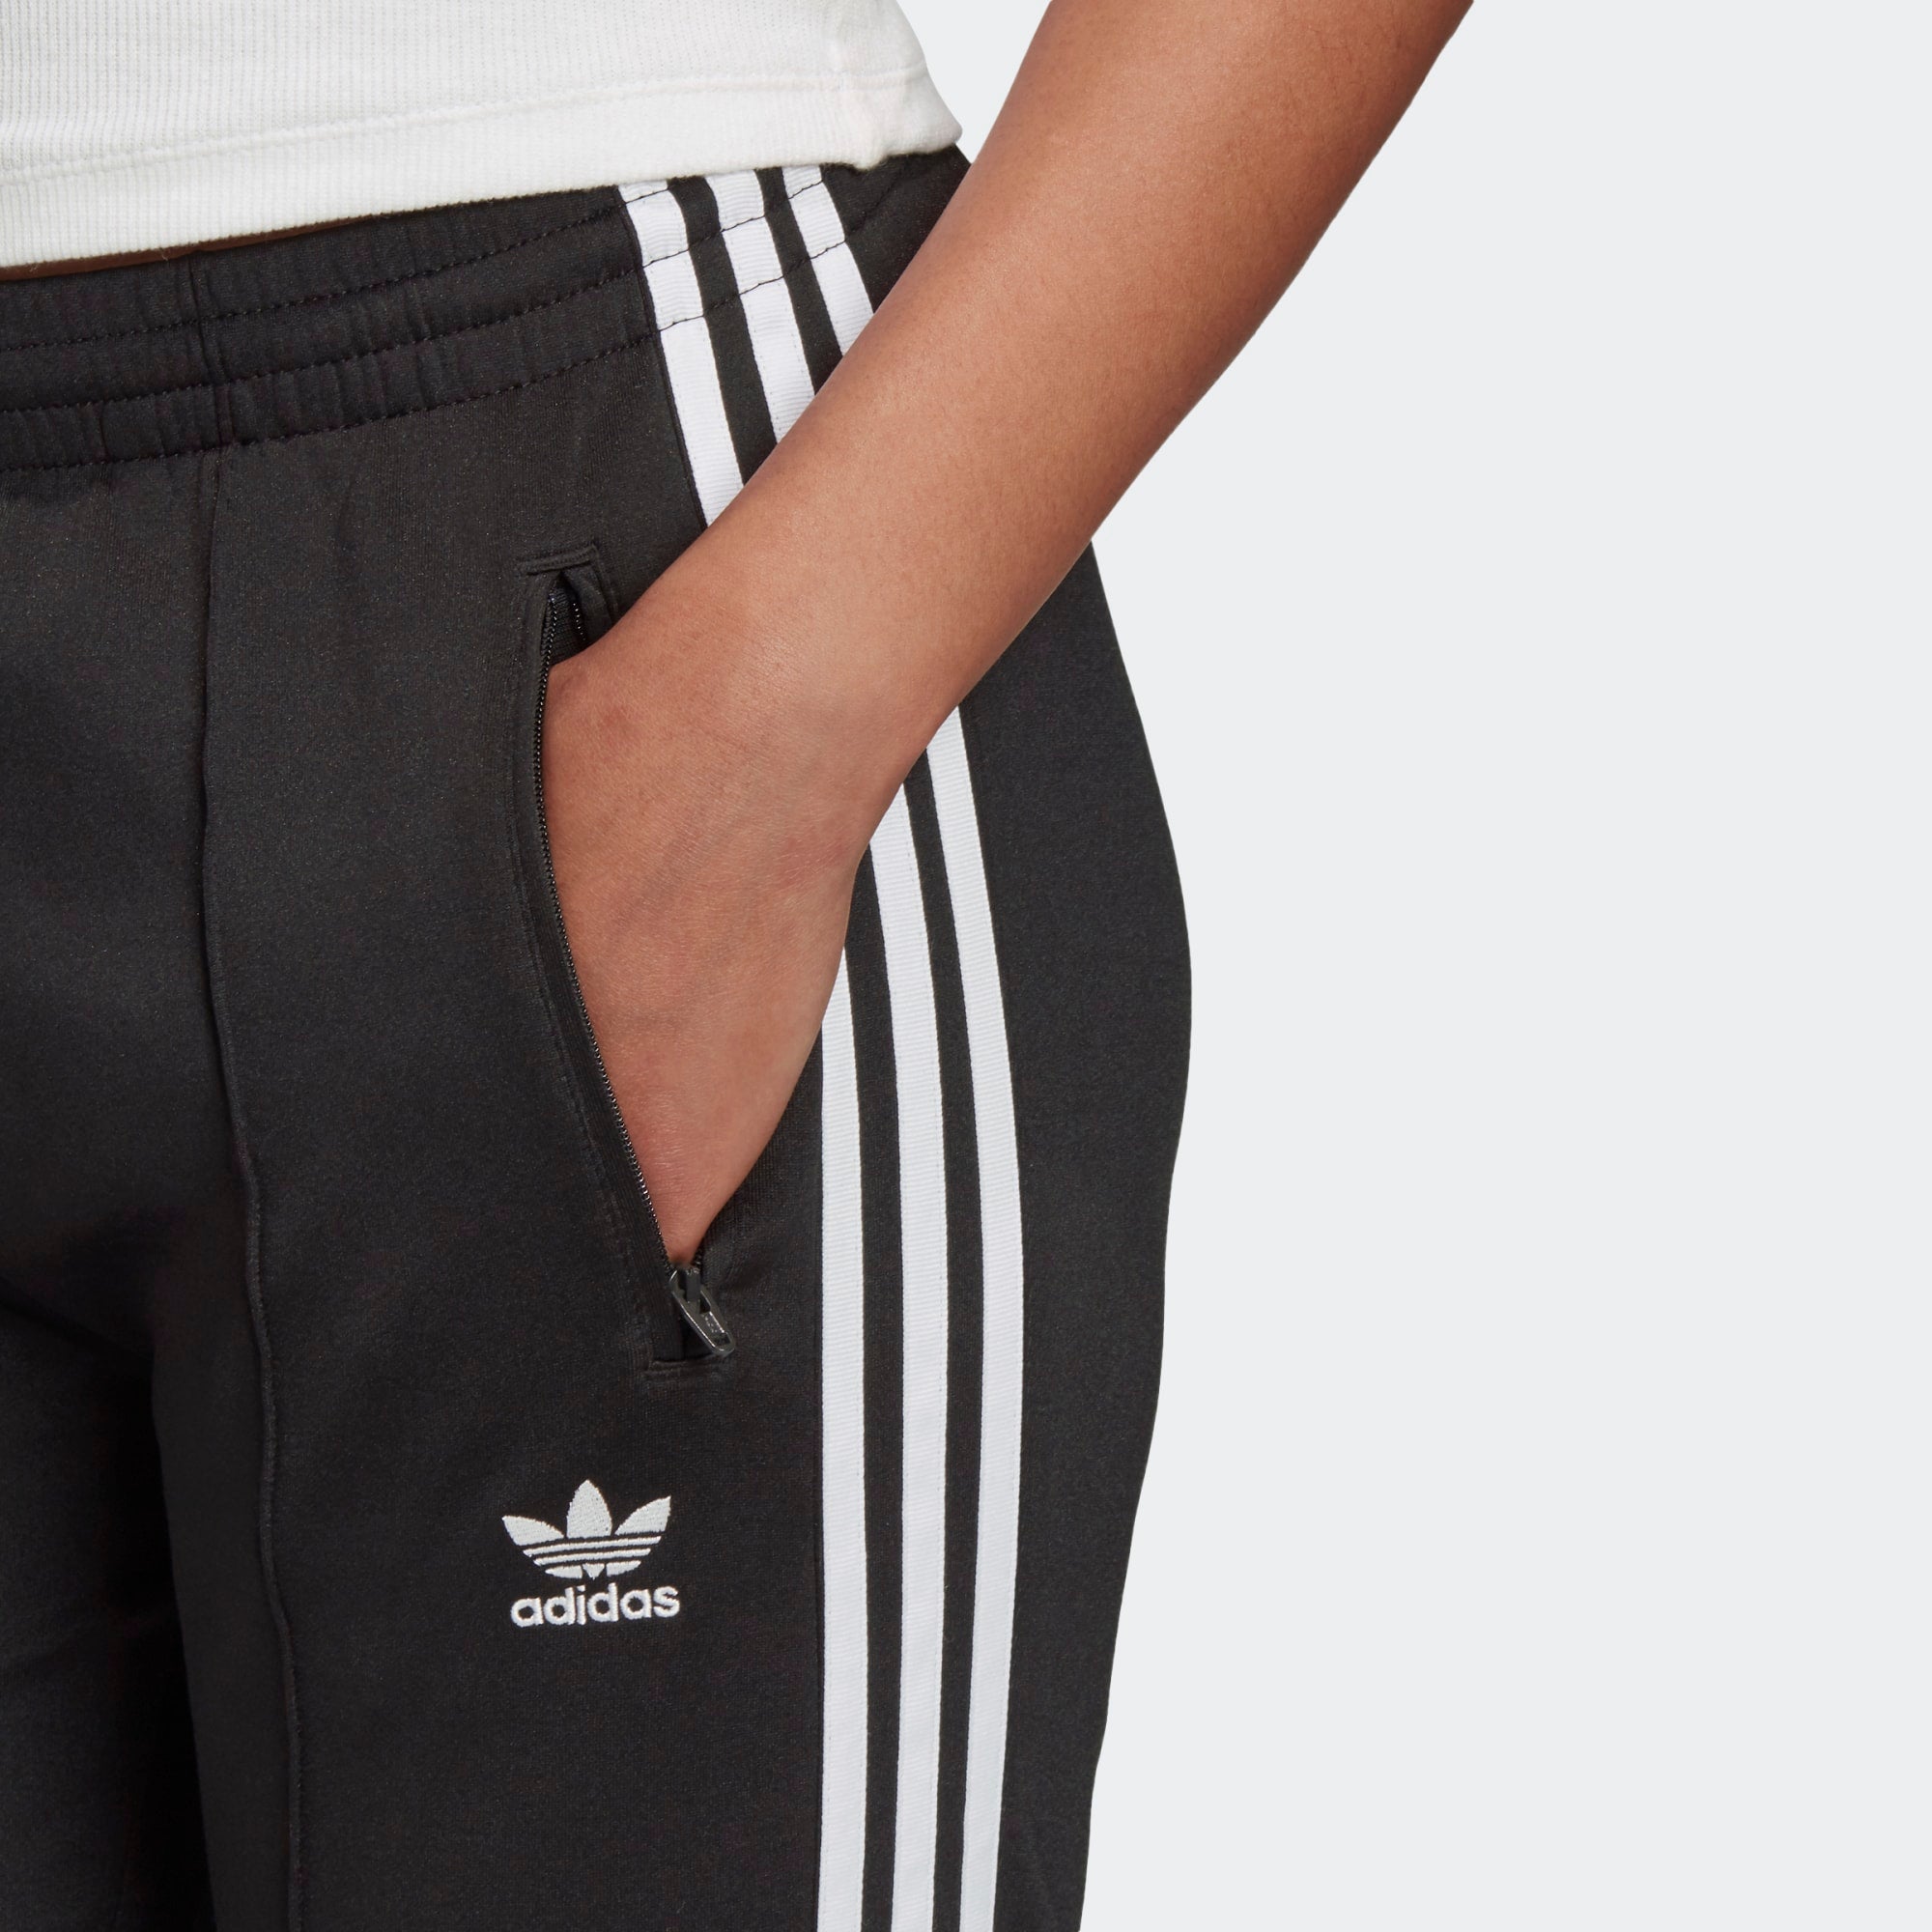 Adidas Primeblue SST Track Pants, Bored of Wearing Workout Clothes? Here's  How to Make Them Look a Little More Elevated